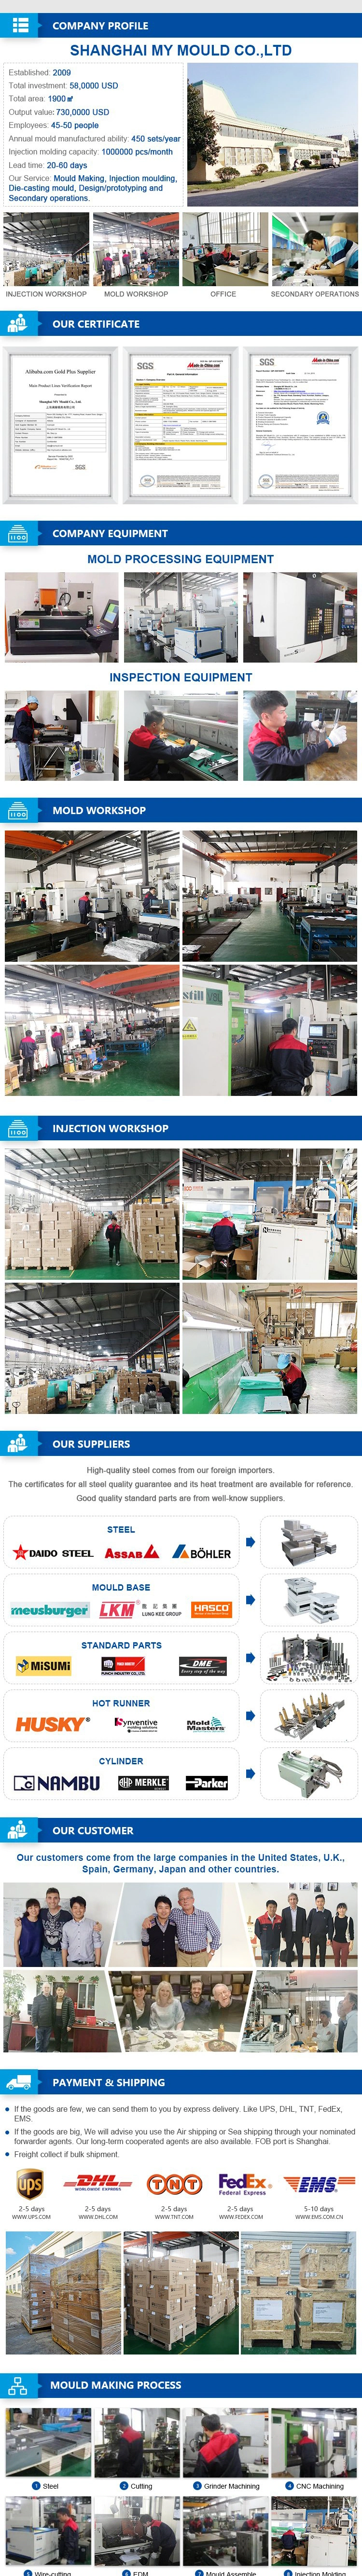 Plastic Injection Mould for Storage Tote with Handle